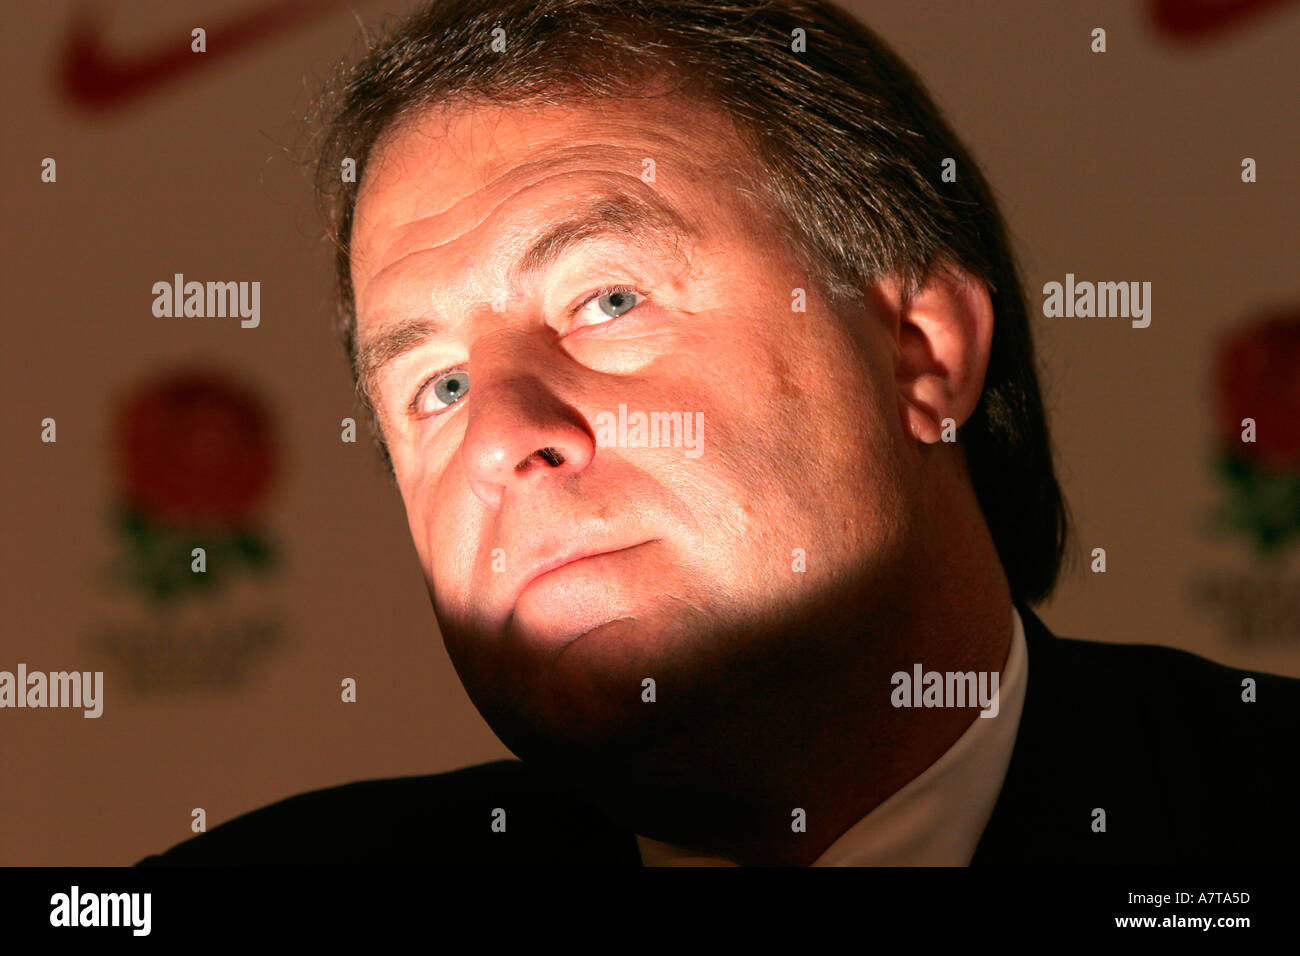 Francis Baron RFU Chief Executive England Rugby at Clive Woodward s resignation press conference September 2004 Stock Photo